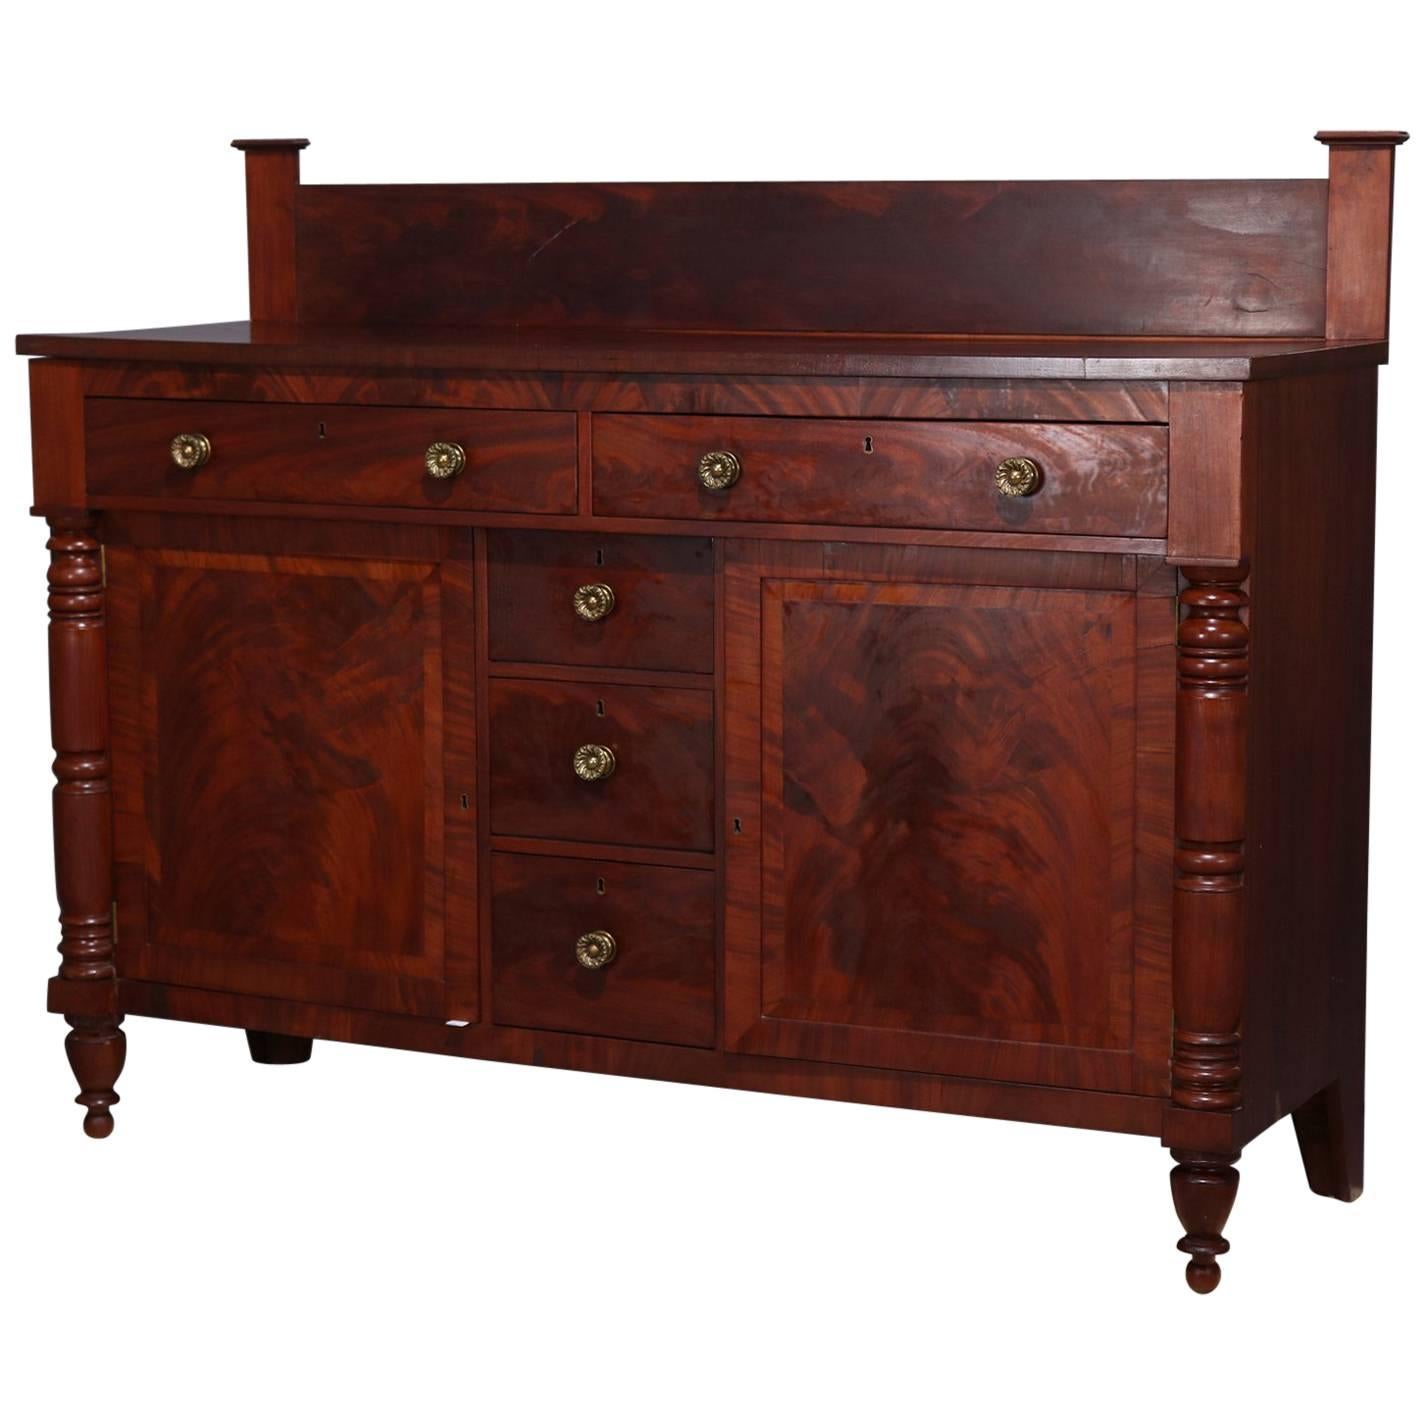 Large Antique Classical American Empire Banded Flame Mahogany Sideboard